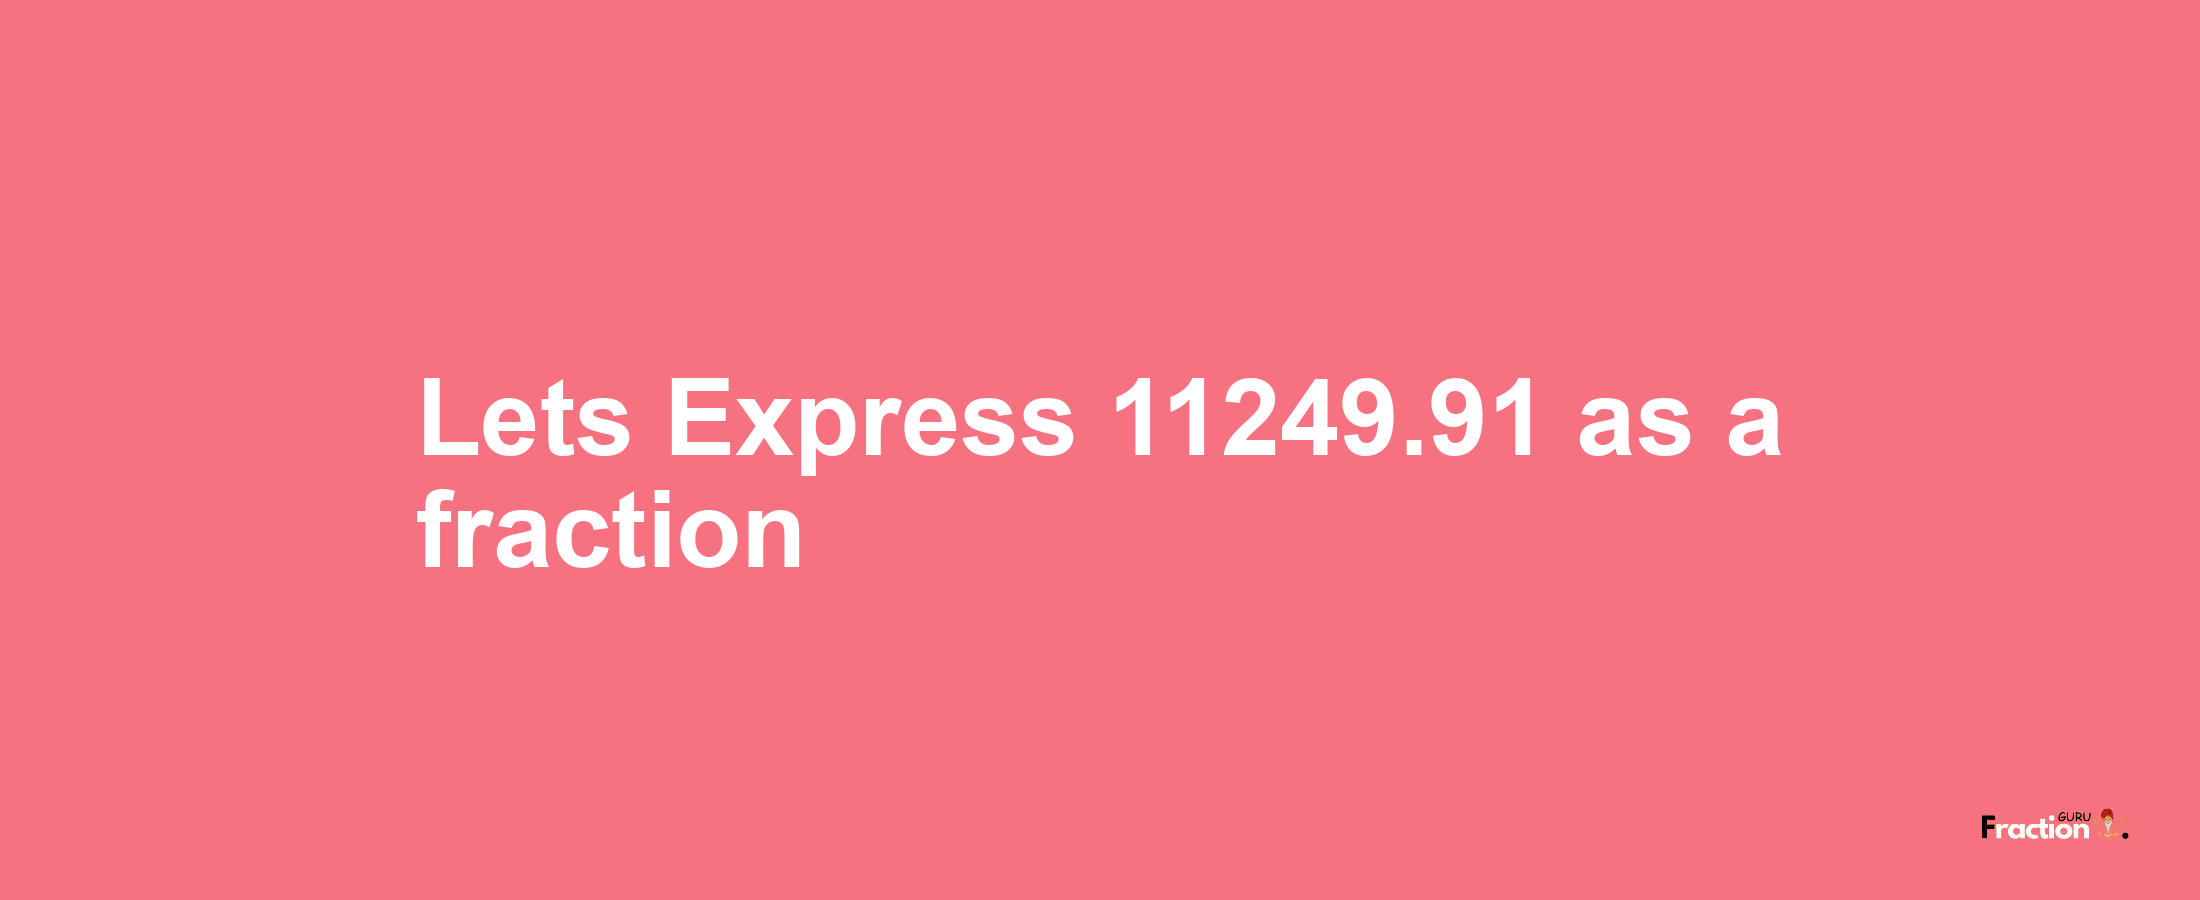 Lets Express 11249.91 as afraction